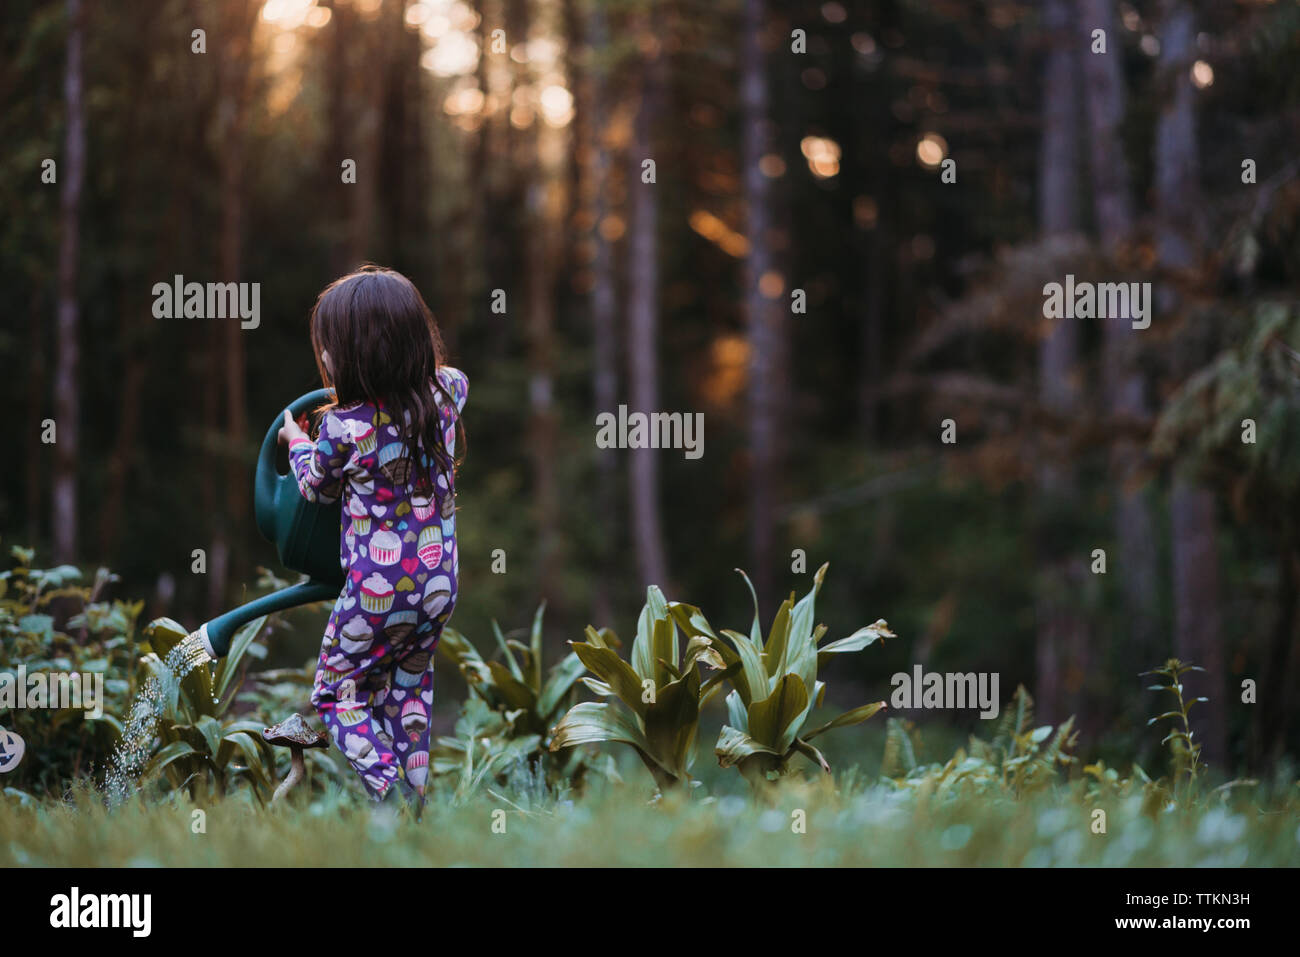 Rear view of girl watering plants at garden Stock Photo